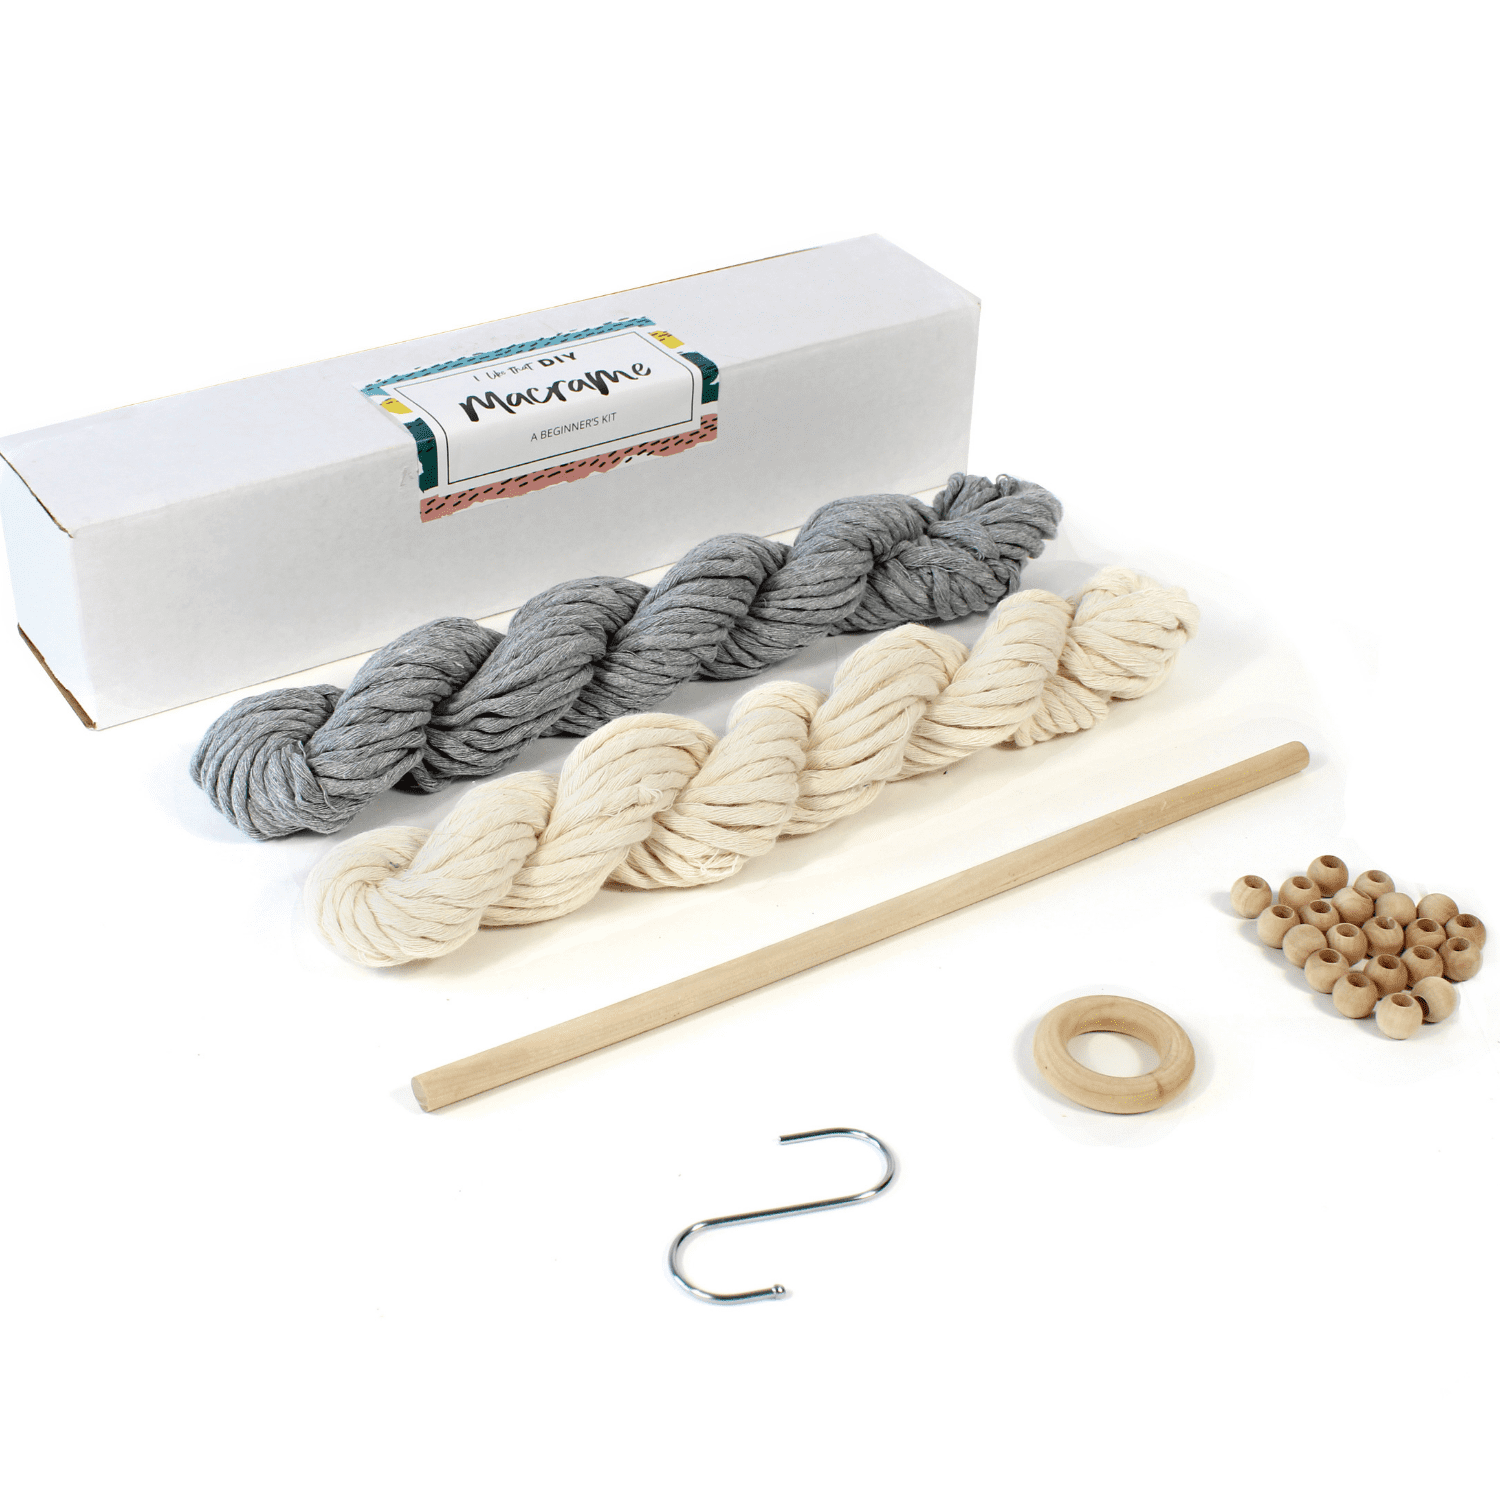 Deluxe Diy Macrame Kit Includes All Macrame Supplies And Instructions Needed To Make A Plant Hanger And Wall Hanging Grey Beige Complete Diy Macrame Starter Kit Walmart Com Walmart Com